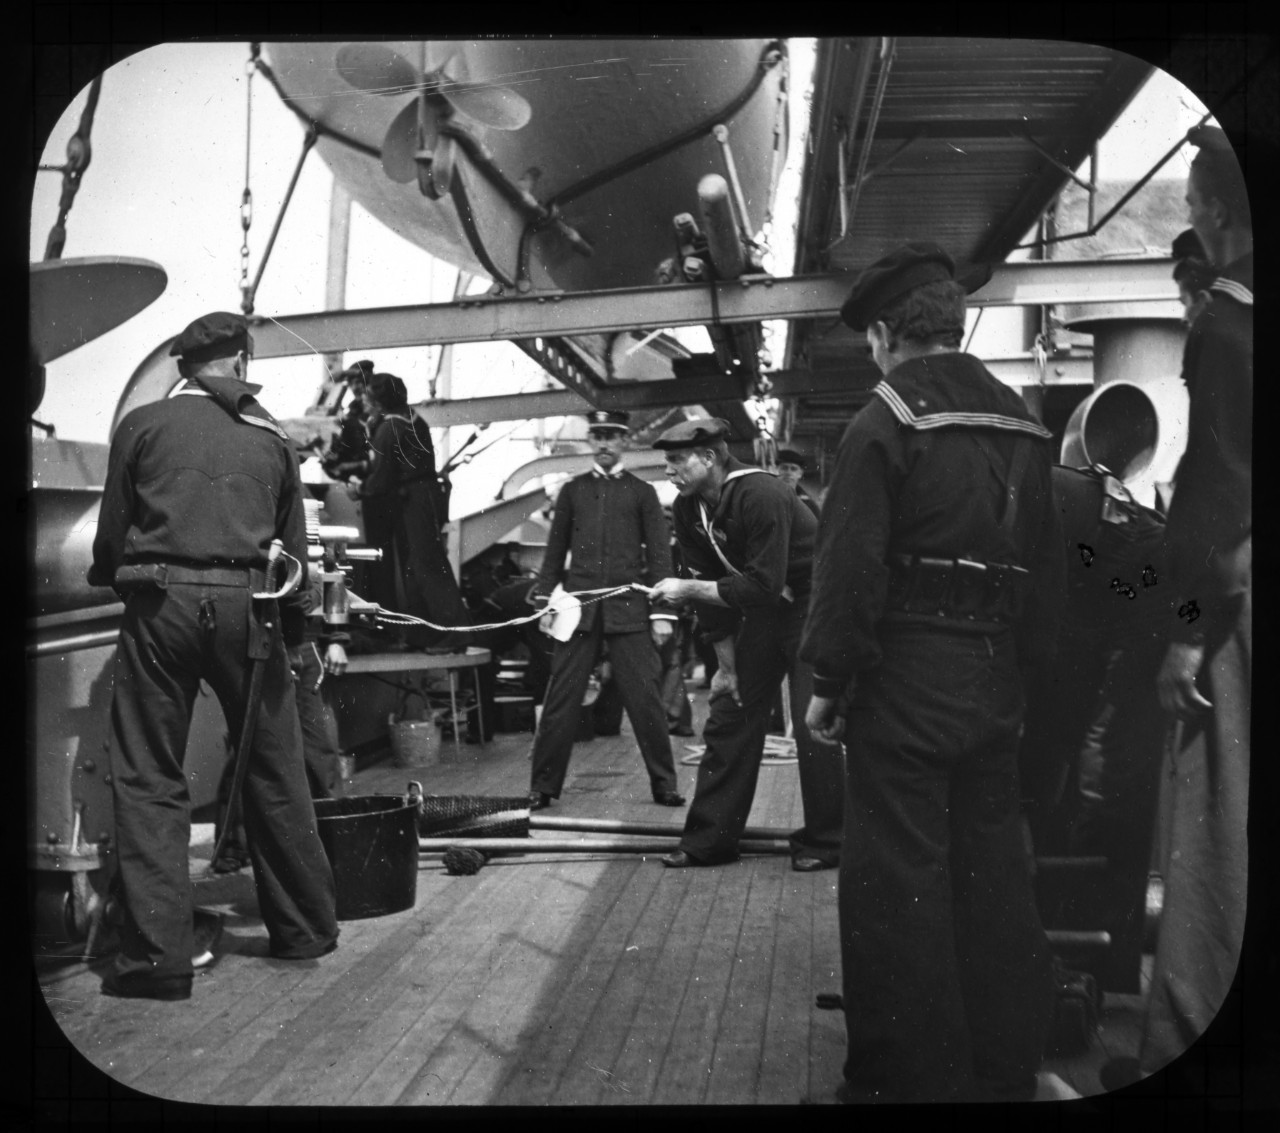 An undated photo shows Sailors of USS Charleston (C-2) manning one of the ship's guns during the Spanish-American War. Naval History and Heritage Command photo archives staff members are scanning a wooden box containing approximately 150 glass pl...